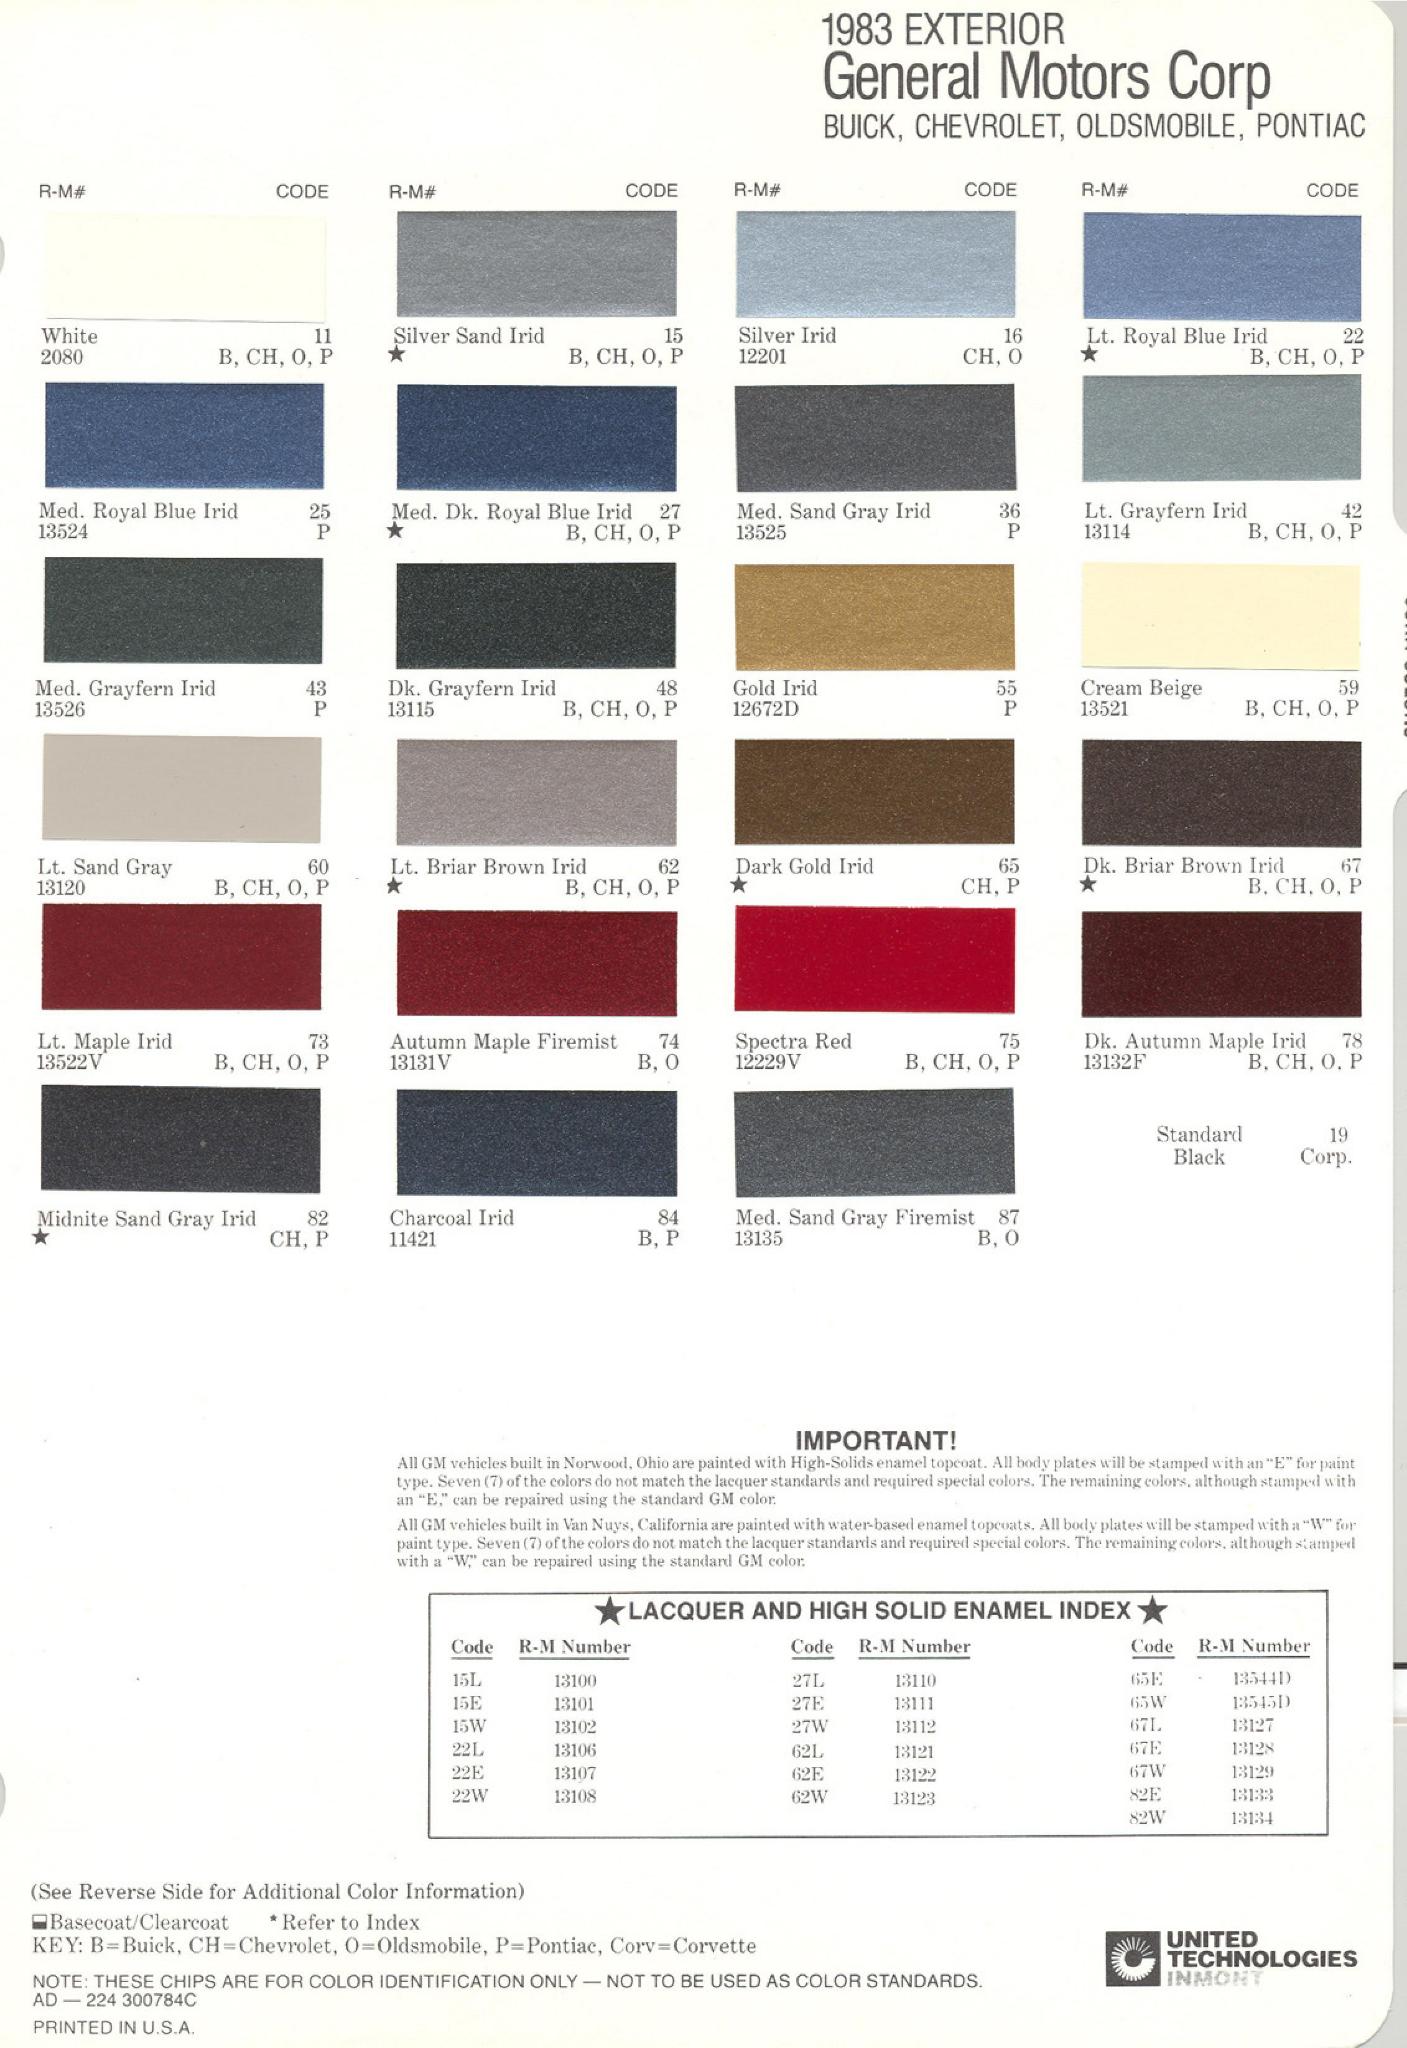 General Motors oem paint swatches, color codes and color names for 1983 vehicles.